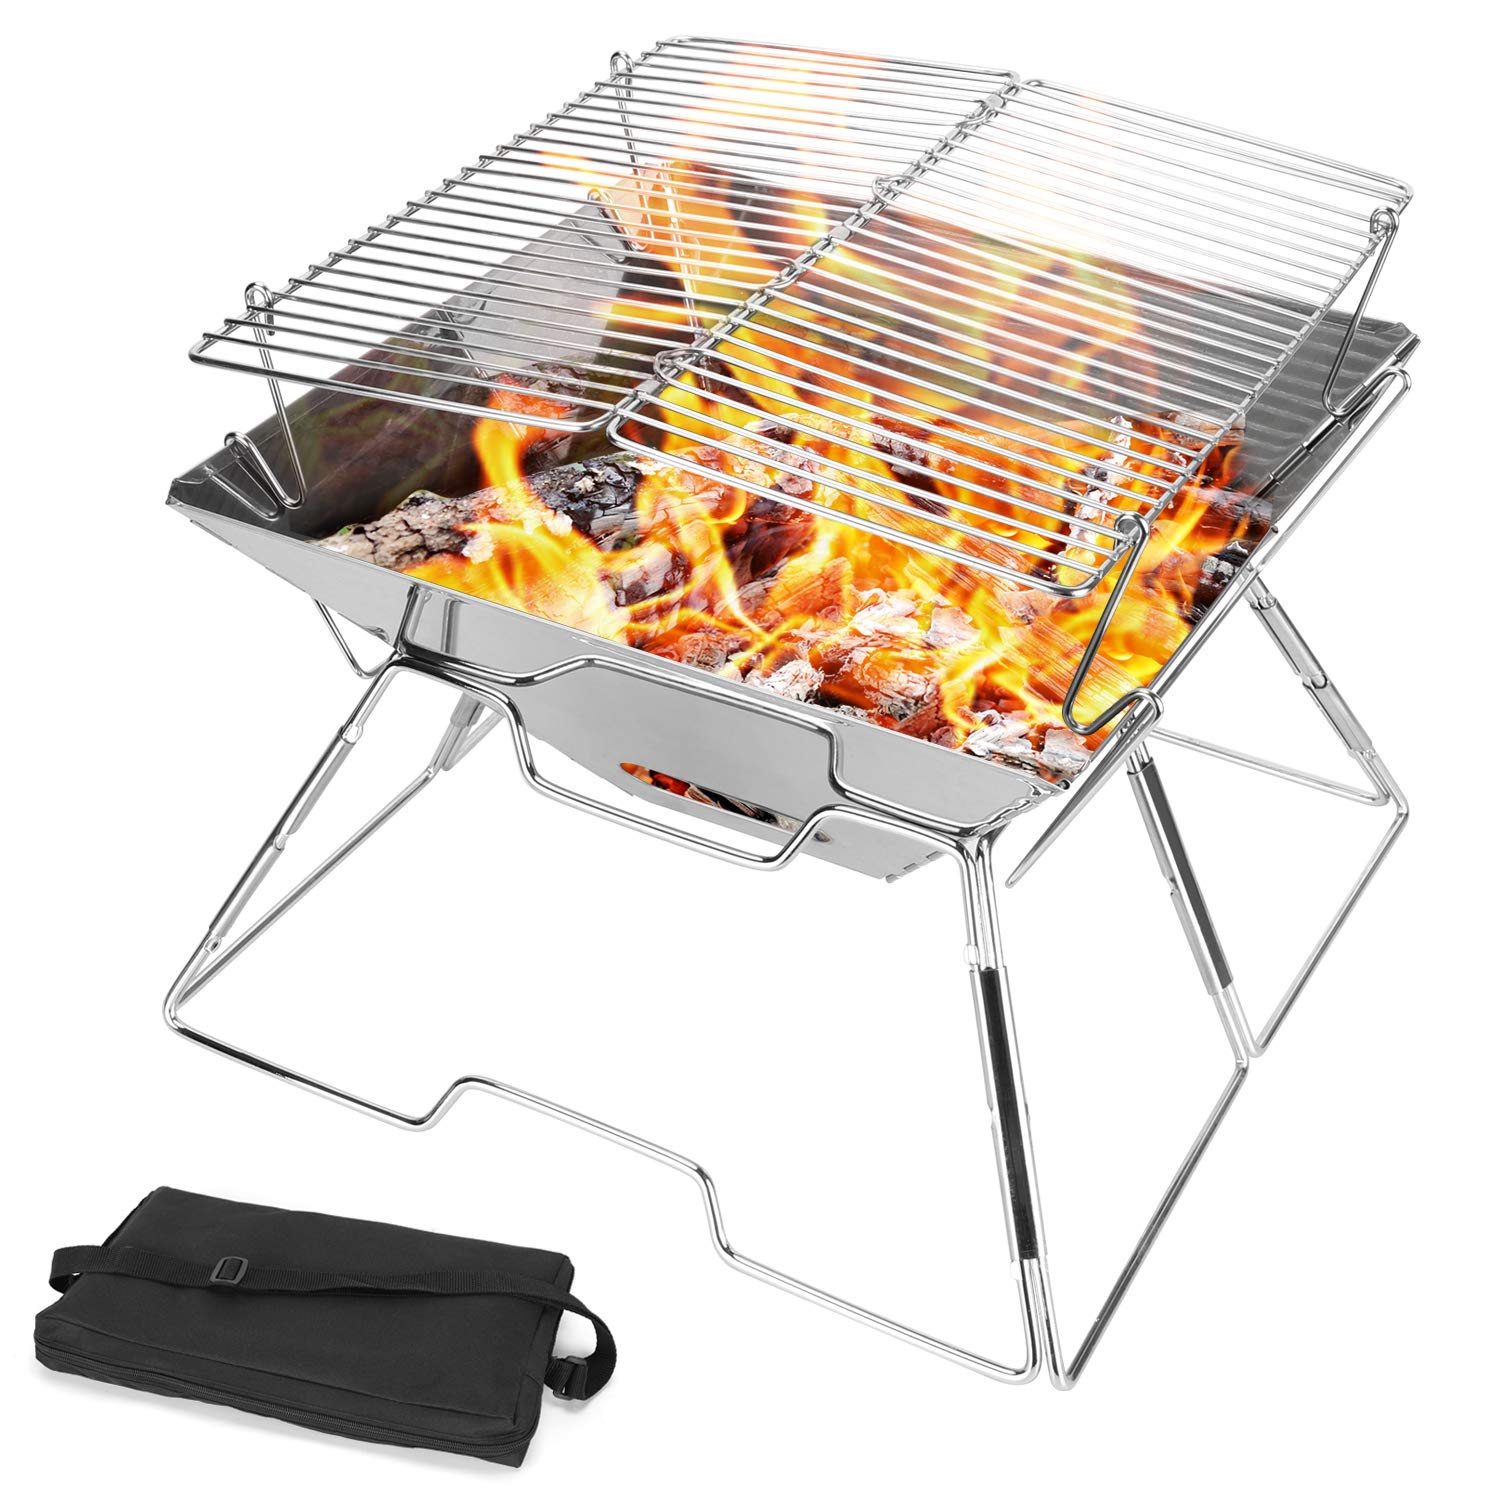 Odoland Collapsible Campfire Grill Camping Fire Pit, 304 Stainless Steel Grill Gate, Heavy Duty Portable Camping Grill with Carrying Bag